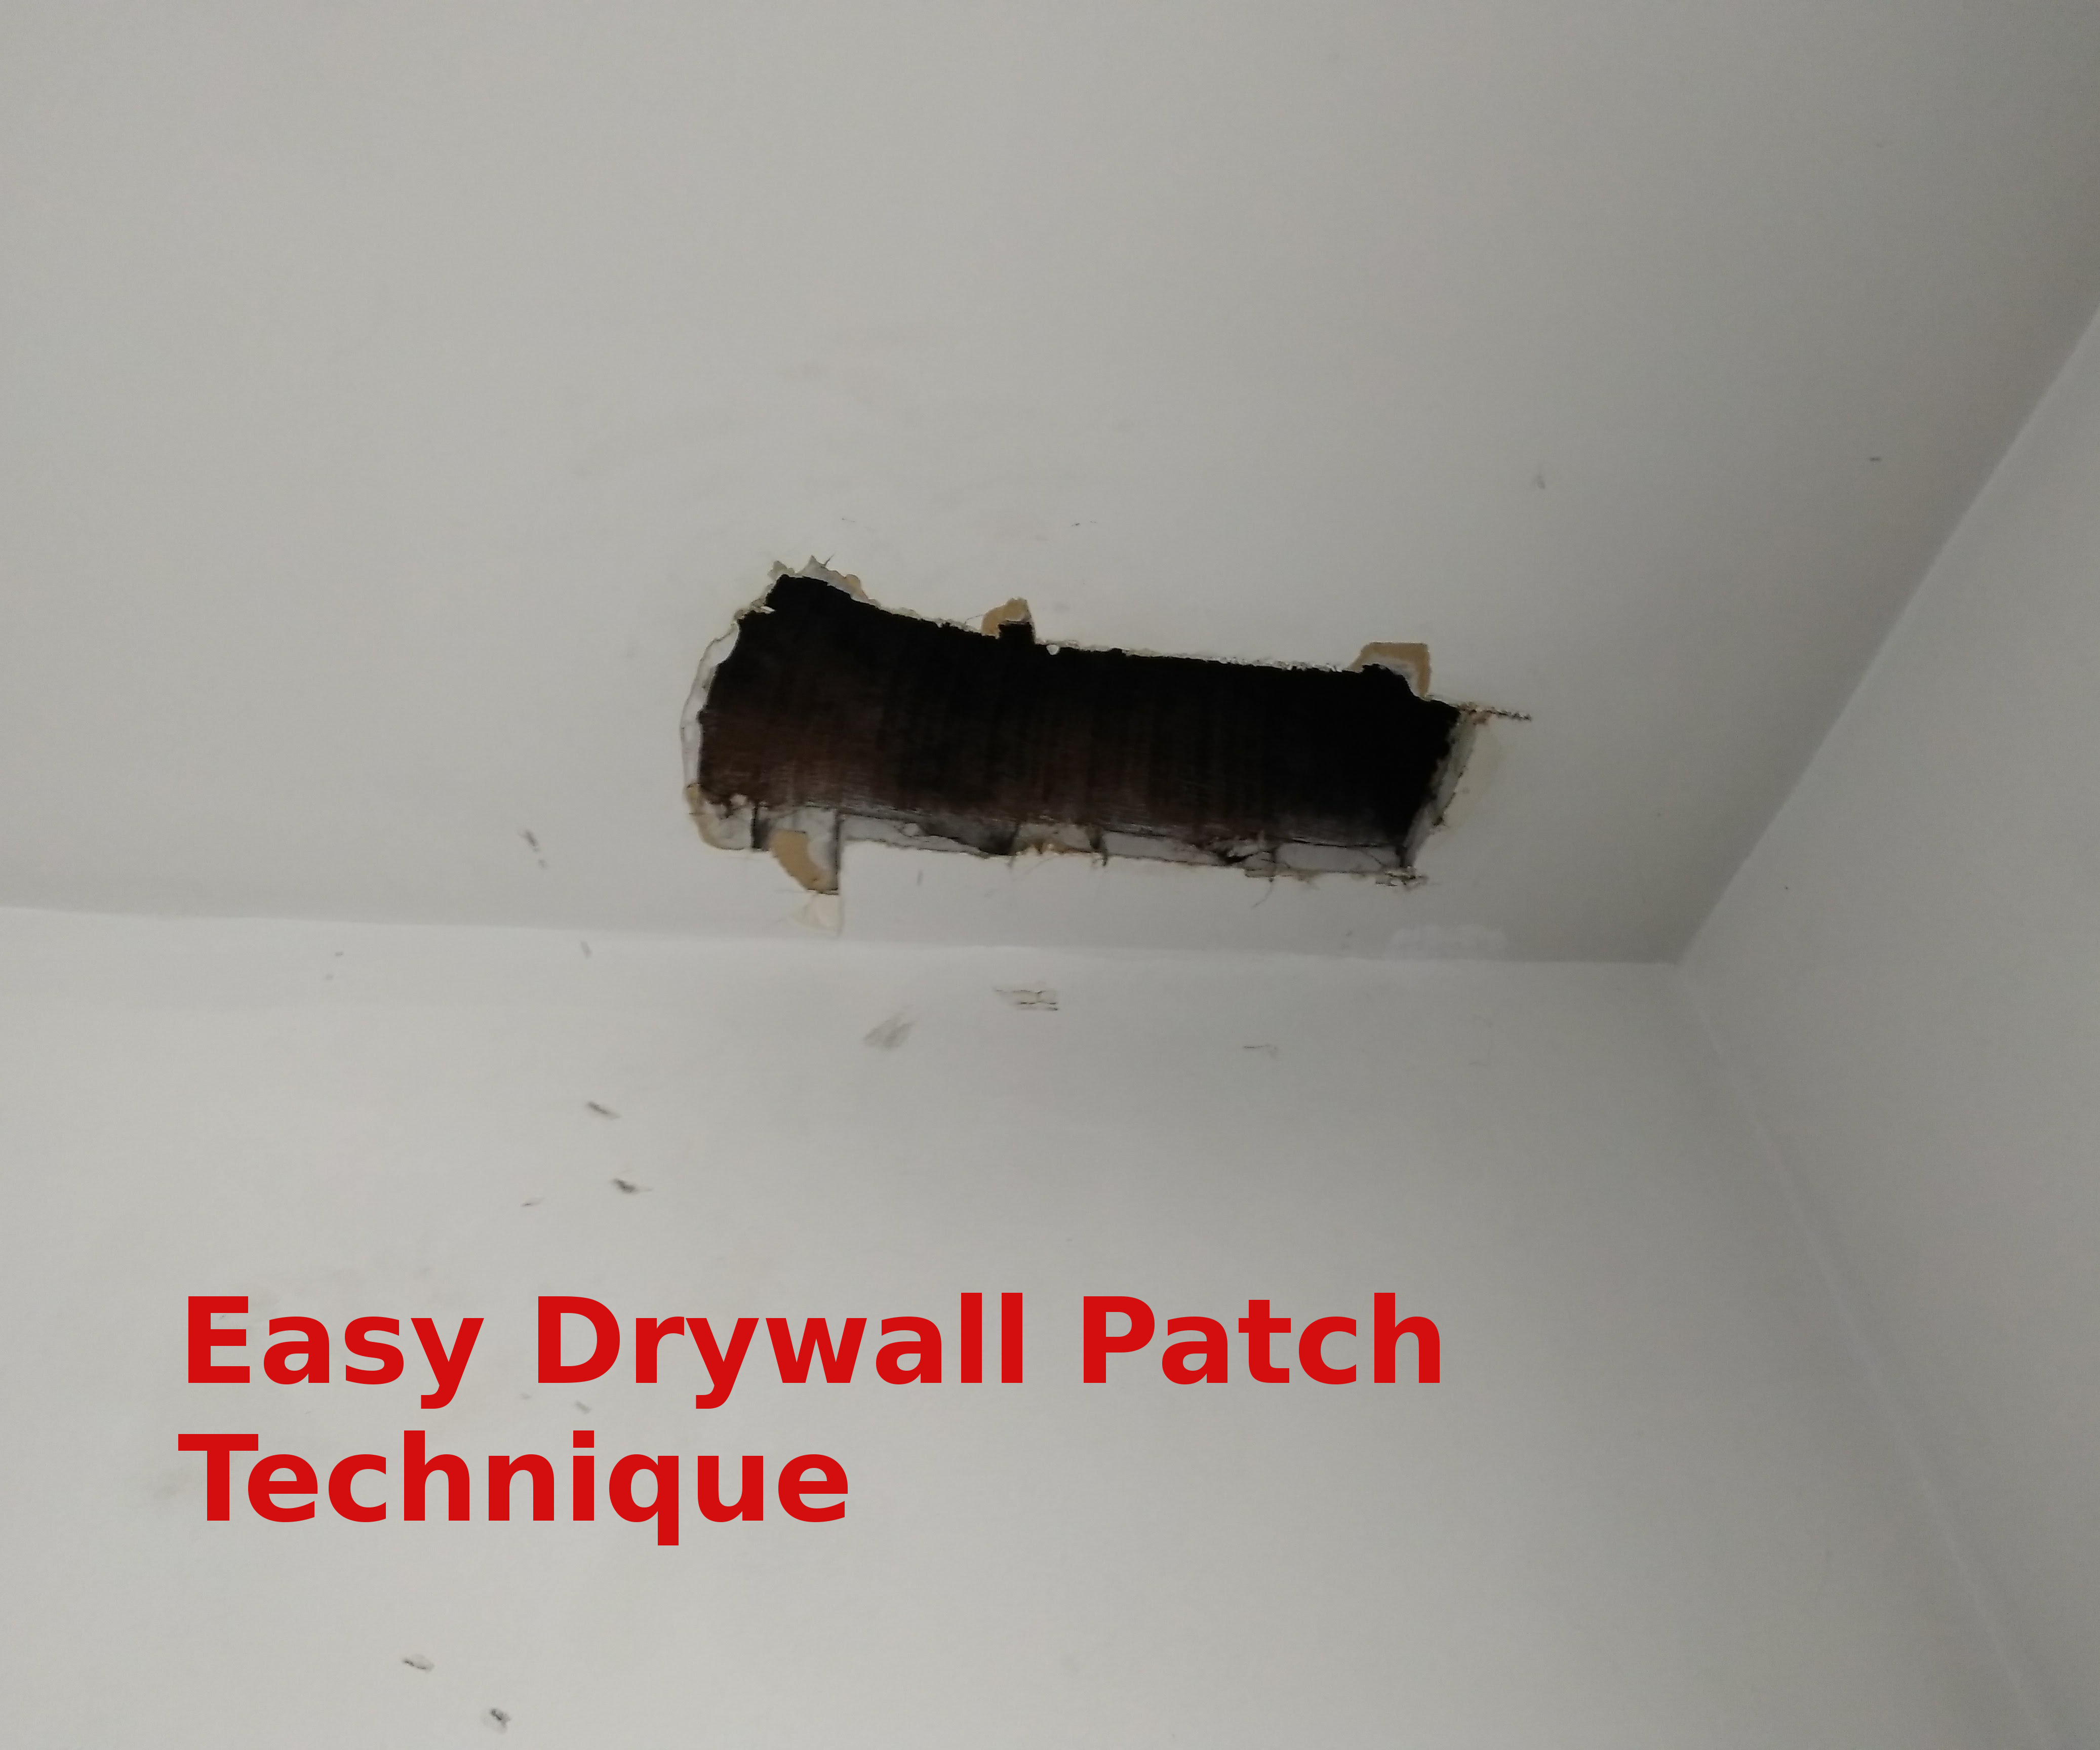 Easy Drywall Patch - Blowout Patch Method